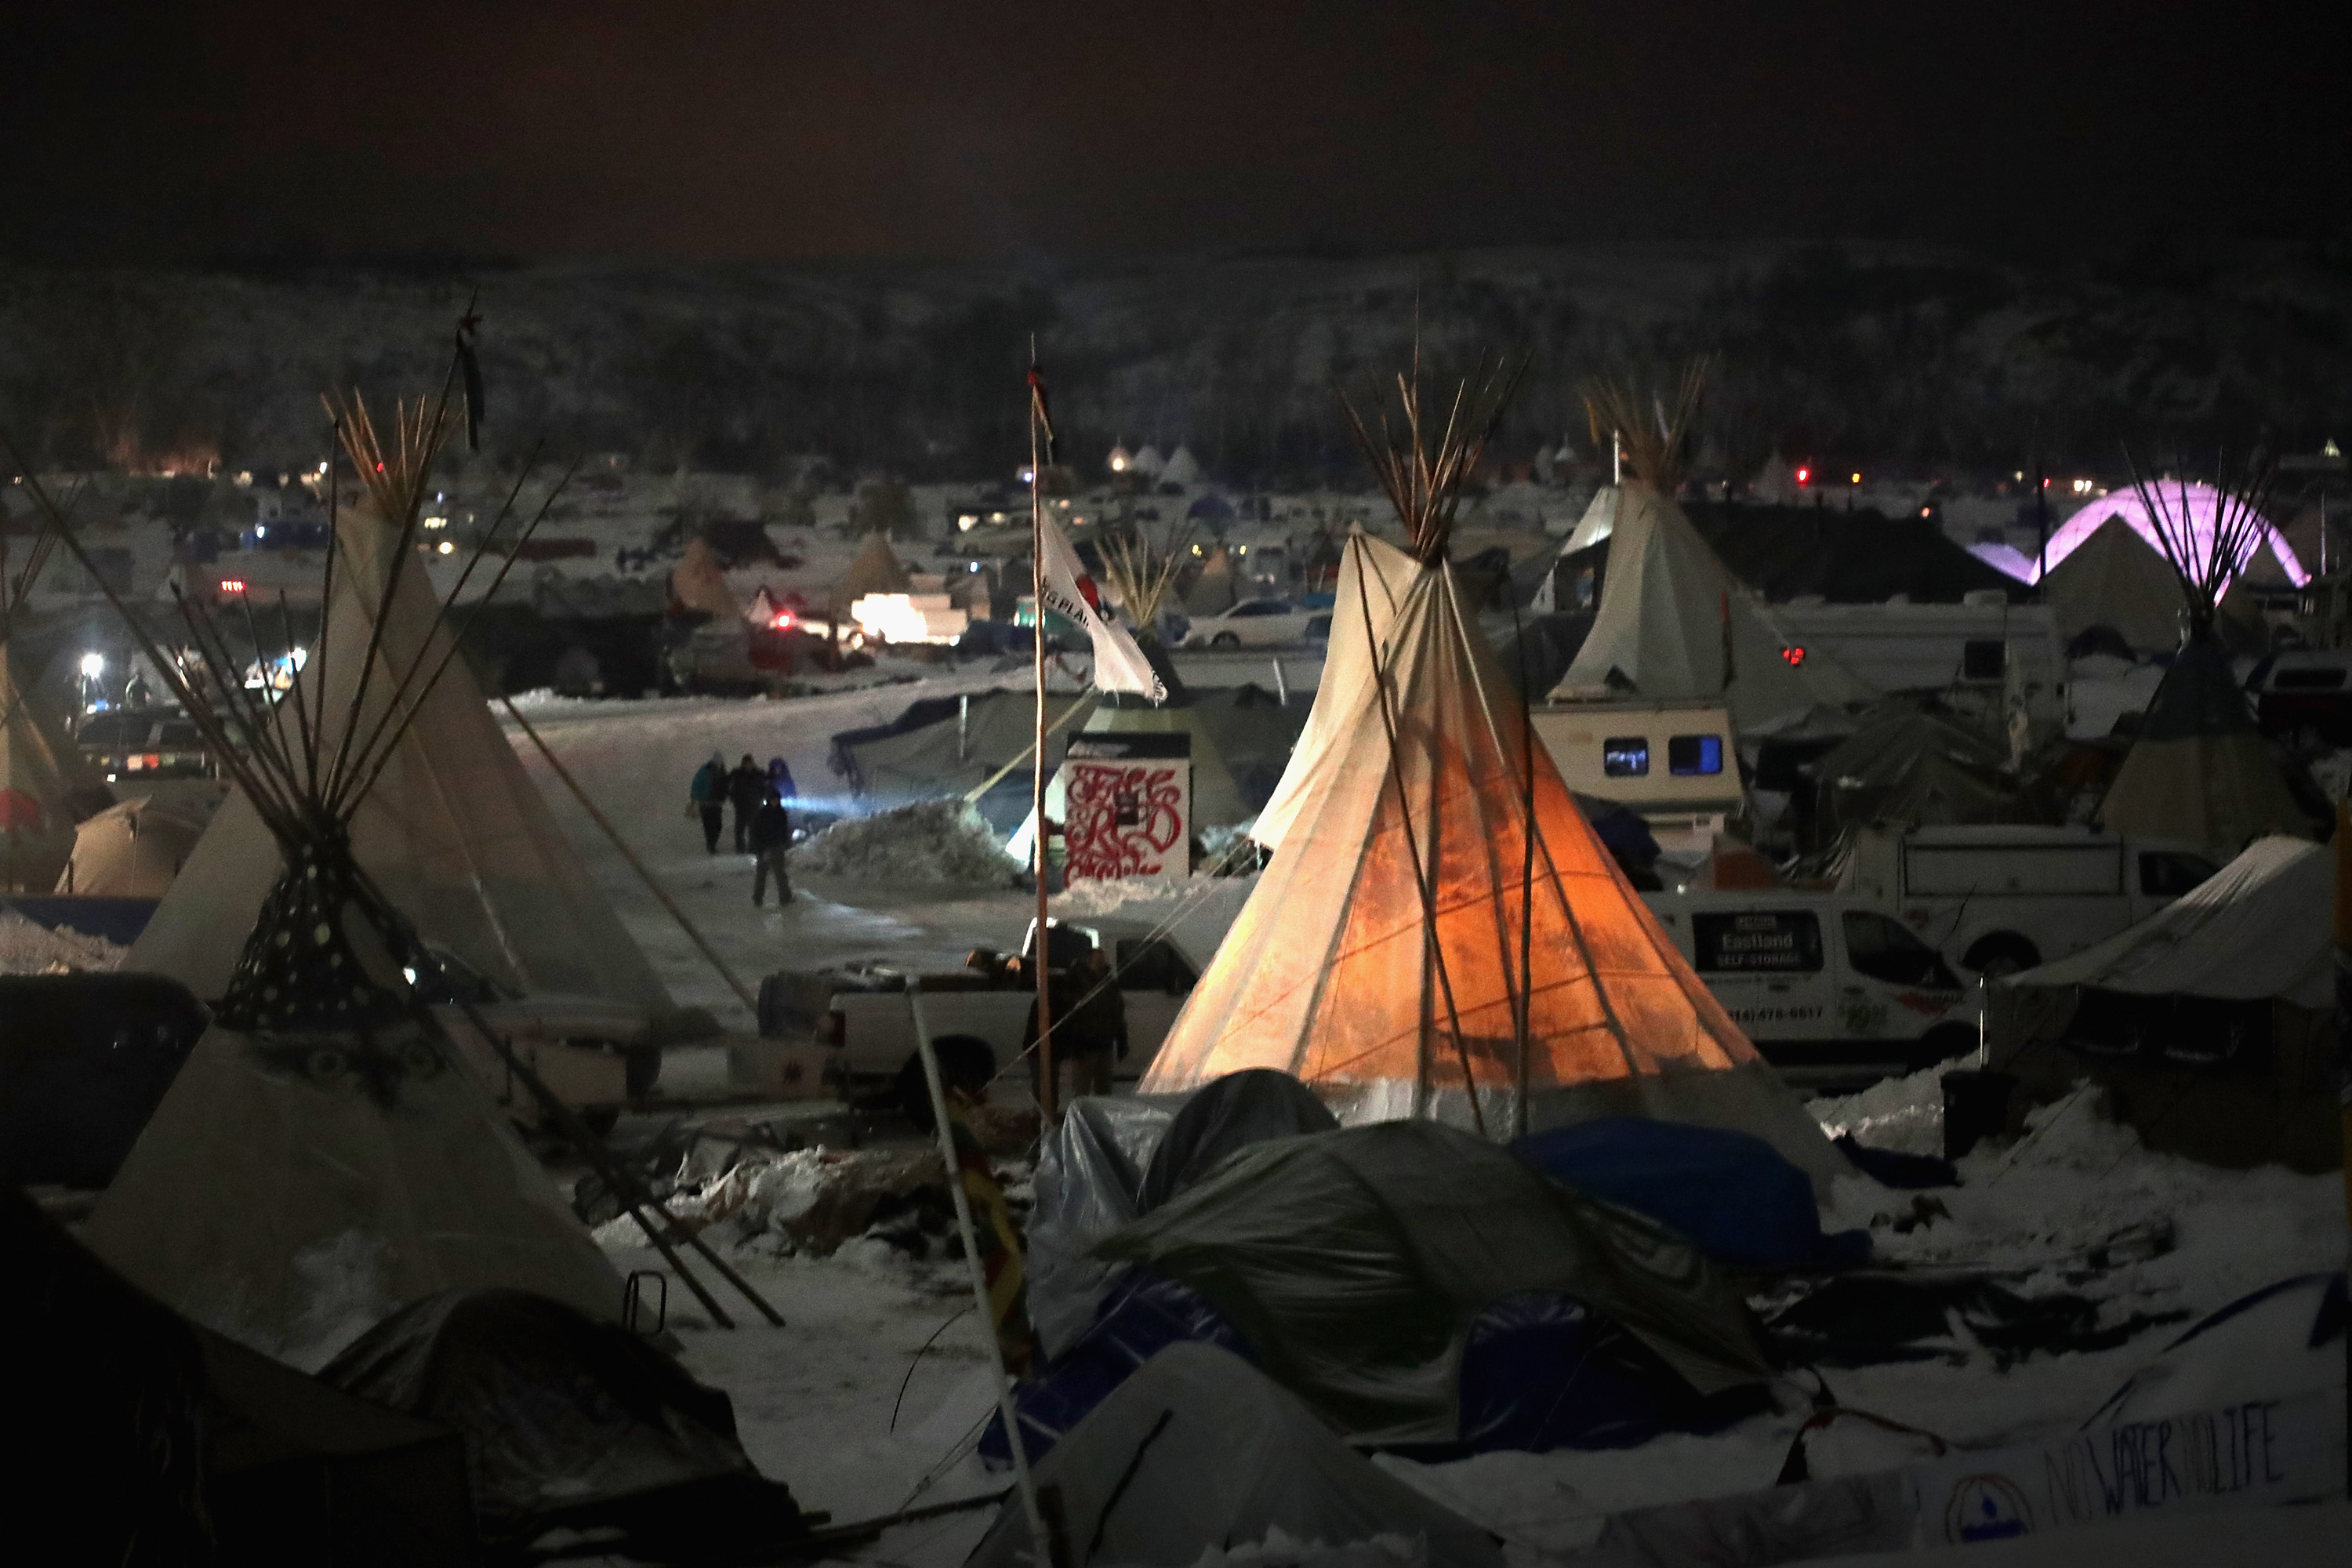 CANNON BALL, ND - DECEMBER 01:  Night falls on Oceti Sakowin Camp on the edge of the Standing Rock Sioux Reservation on December 1, 2016 outside Cannon Ball, North Dakota. Native Americans and activists from around the country have been gathering at the camp for several months trying to halt the construction of the Dakota Access Pipeline. The proposed 1,172-mile-long pipeline would transport oil from the North Dakota Bakken region through South Dakota, Iowa and into Illinois.  (Photo by Scott Olson/Getty Images)